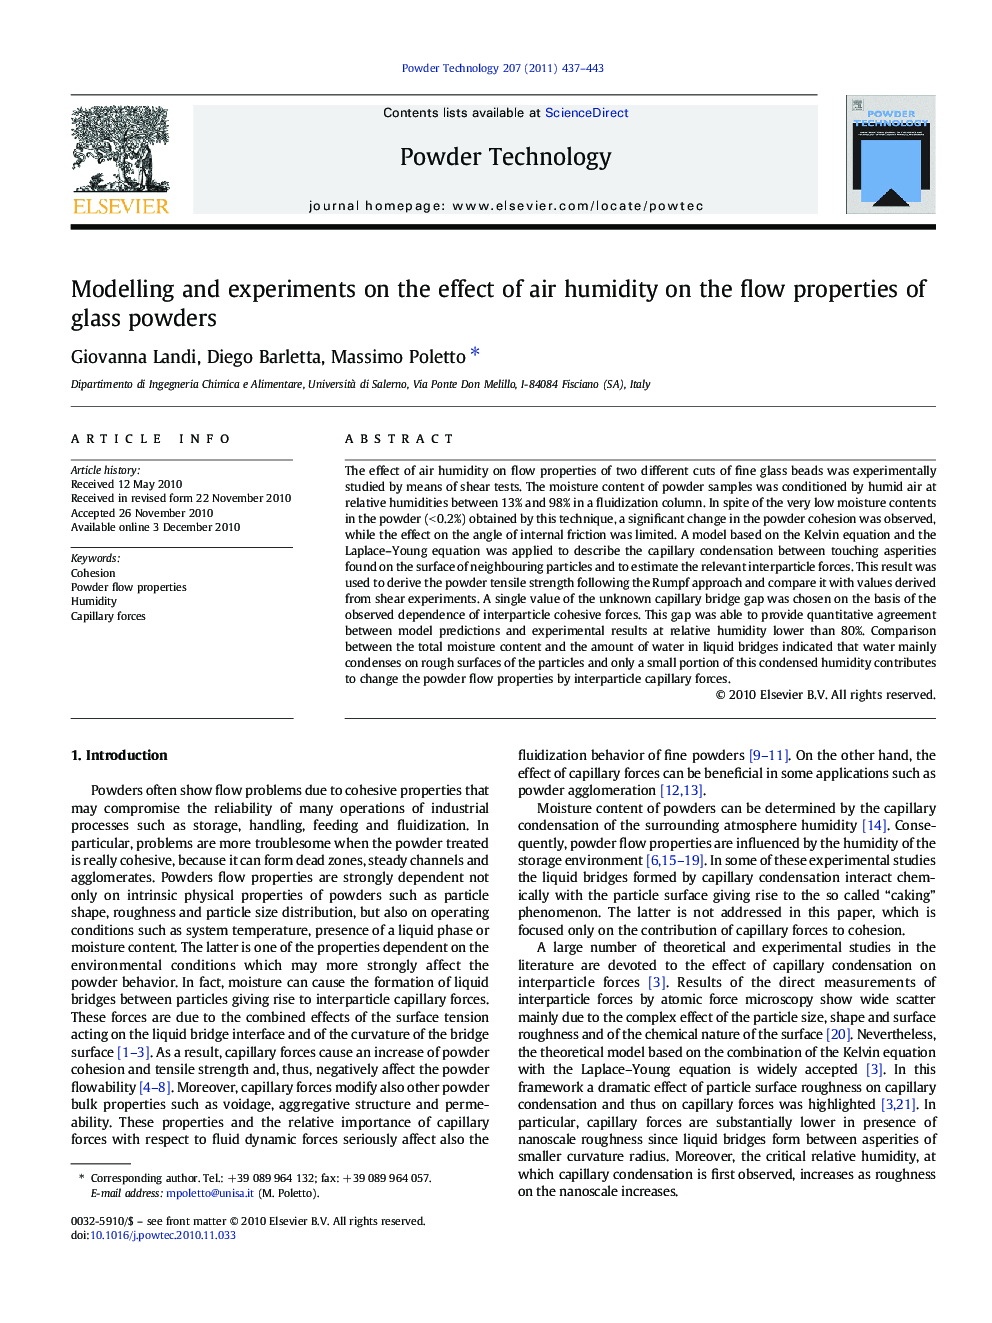 Modelling and experiments on the effect of air humidity on the flow properties of glass powders